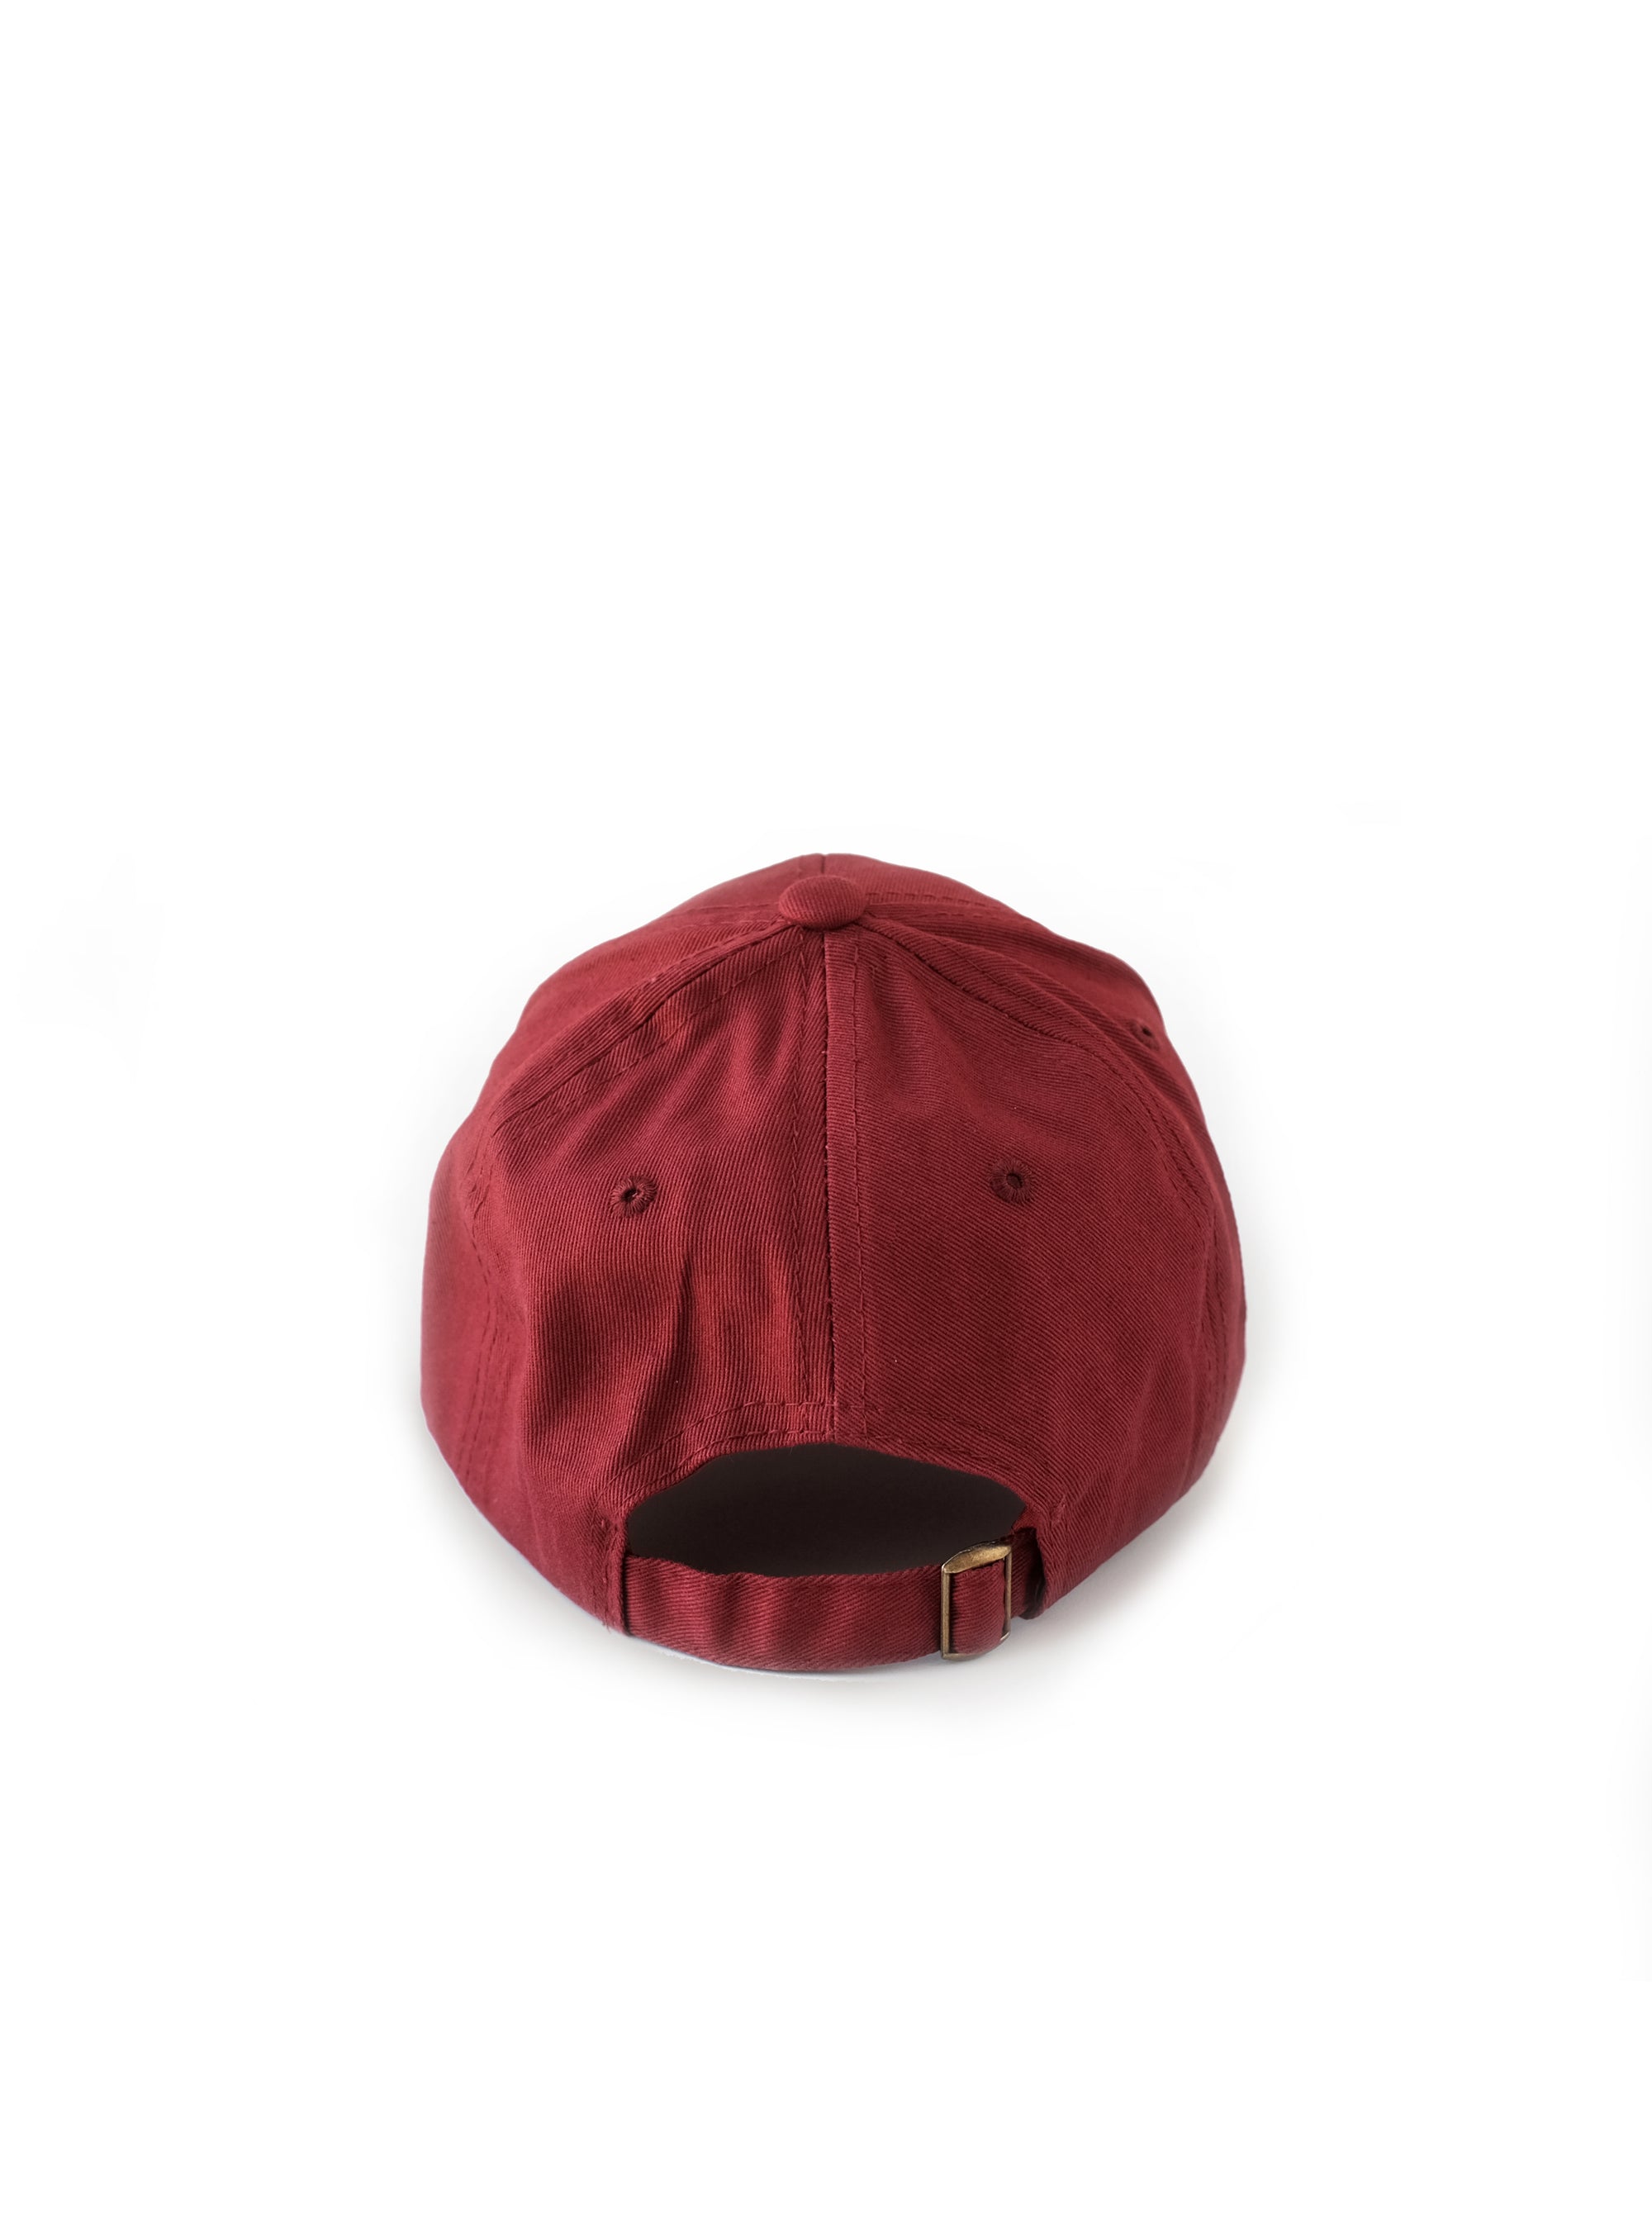 red cherry cap with adjustable strap